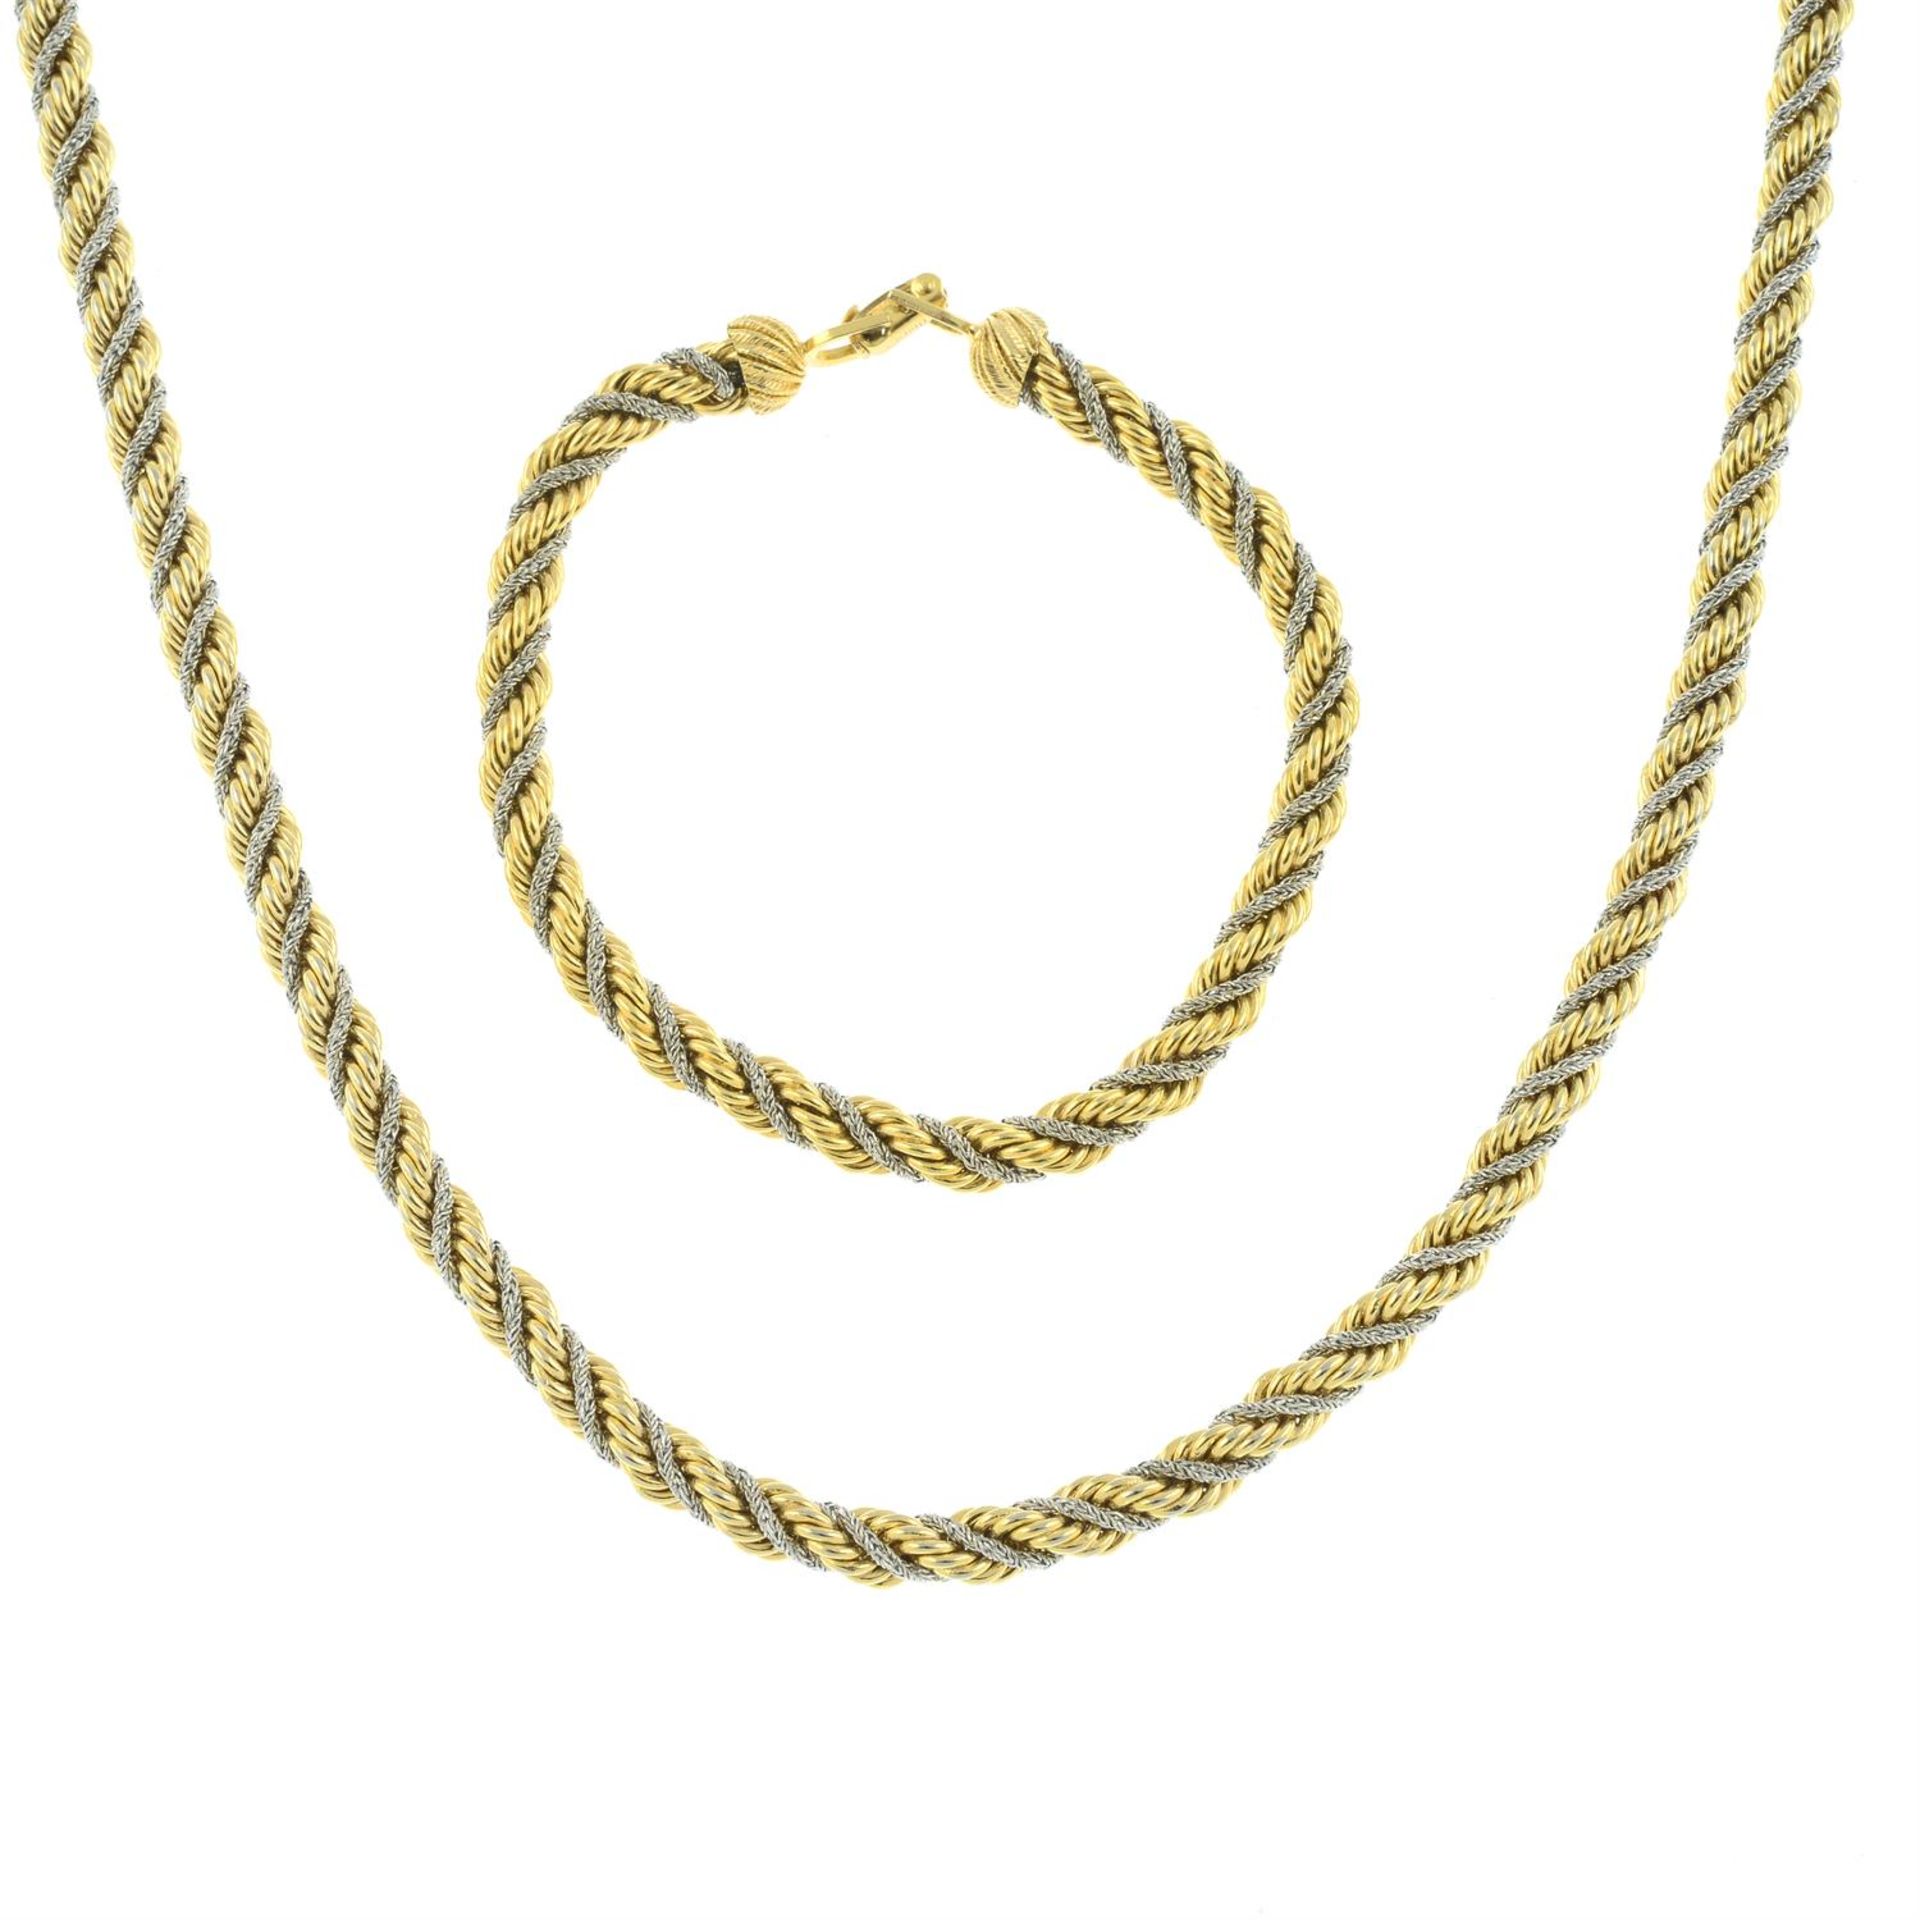 CHRISTIAN DIOR - a two-tone rope chain necklace and braclet.